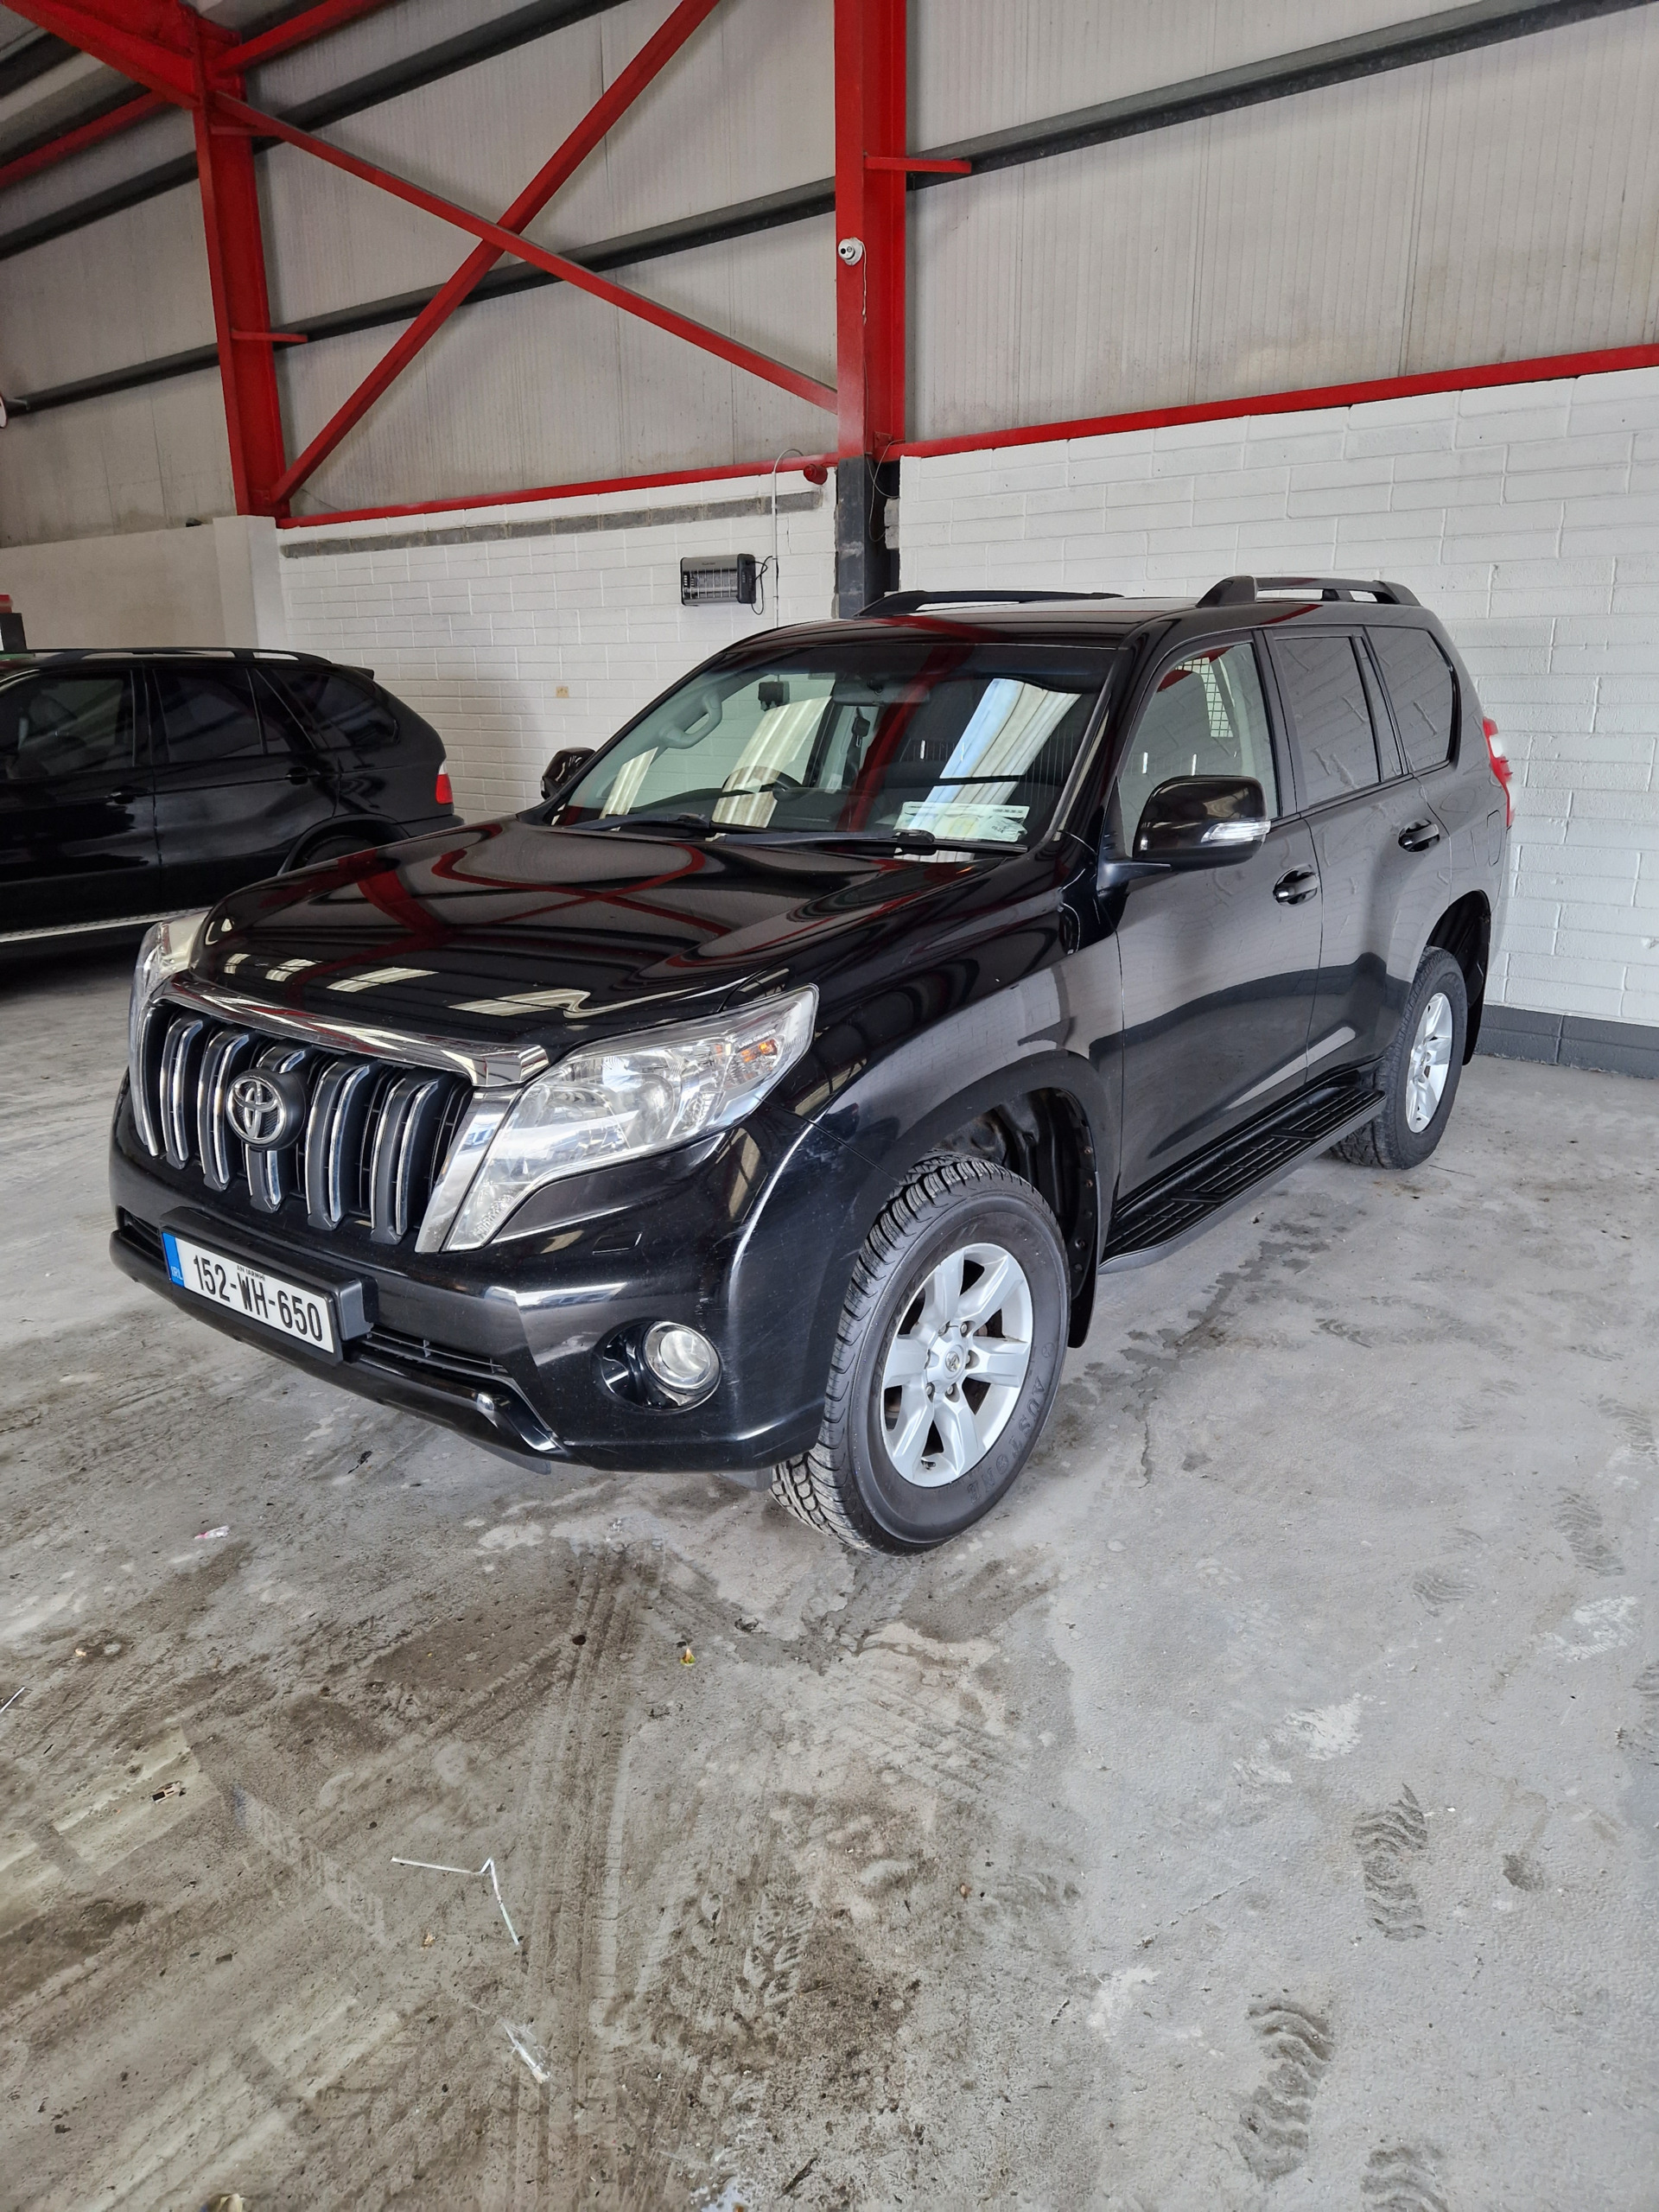 Used Toyota Landcruiser 2015 in Galway